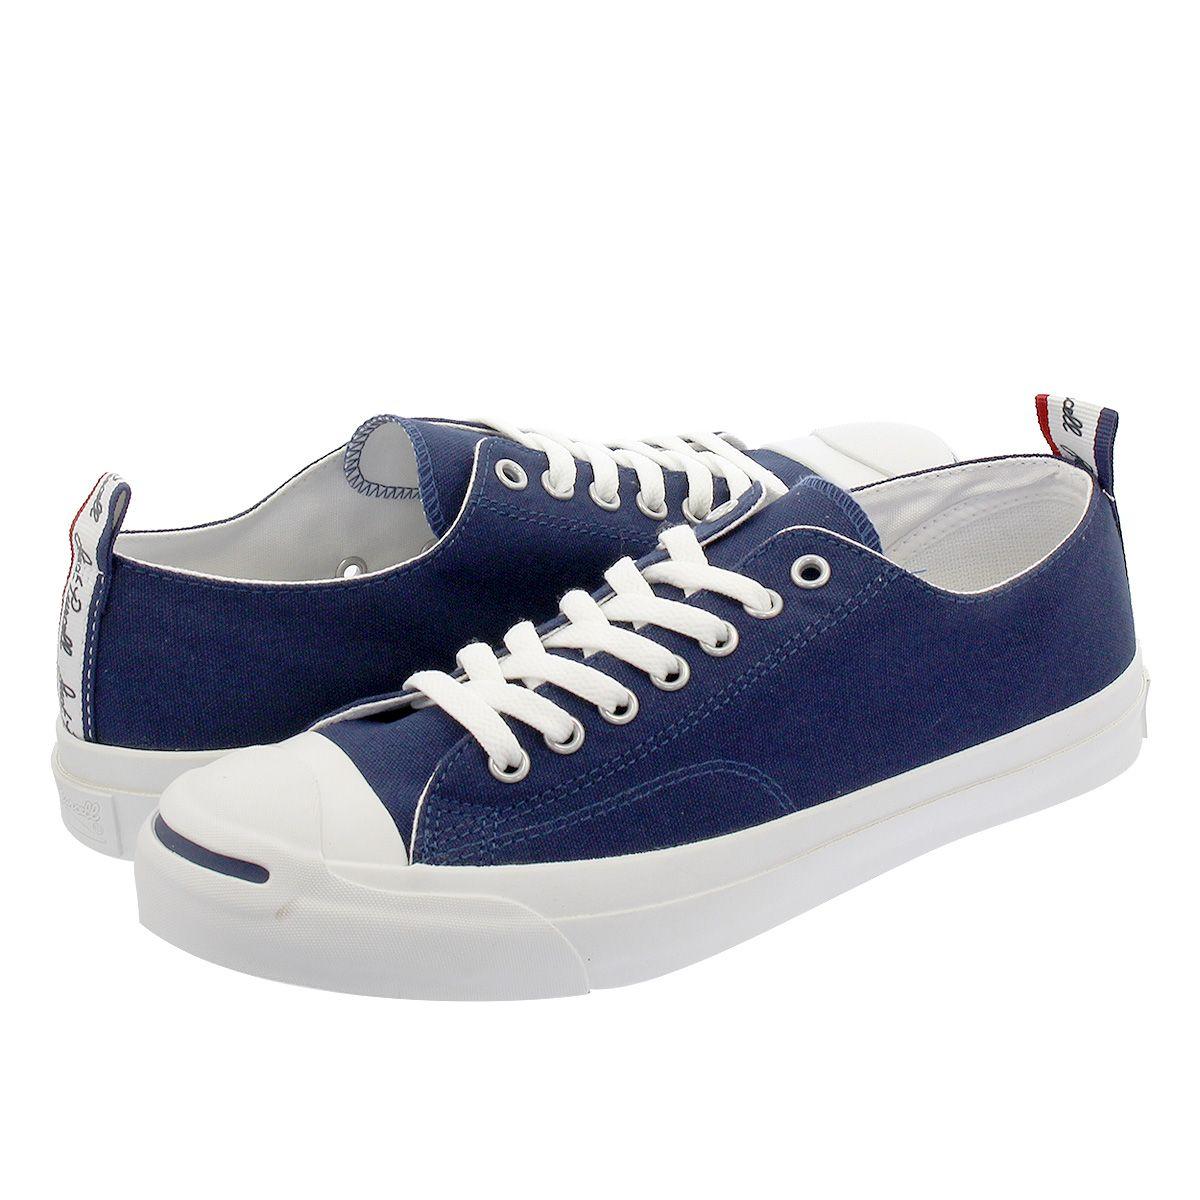 Purcell Logo - CONVERSE JACK PURCELL LOGOTAPE RH Converse Jack Pursel logo tape RH NAVY  32263615